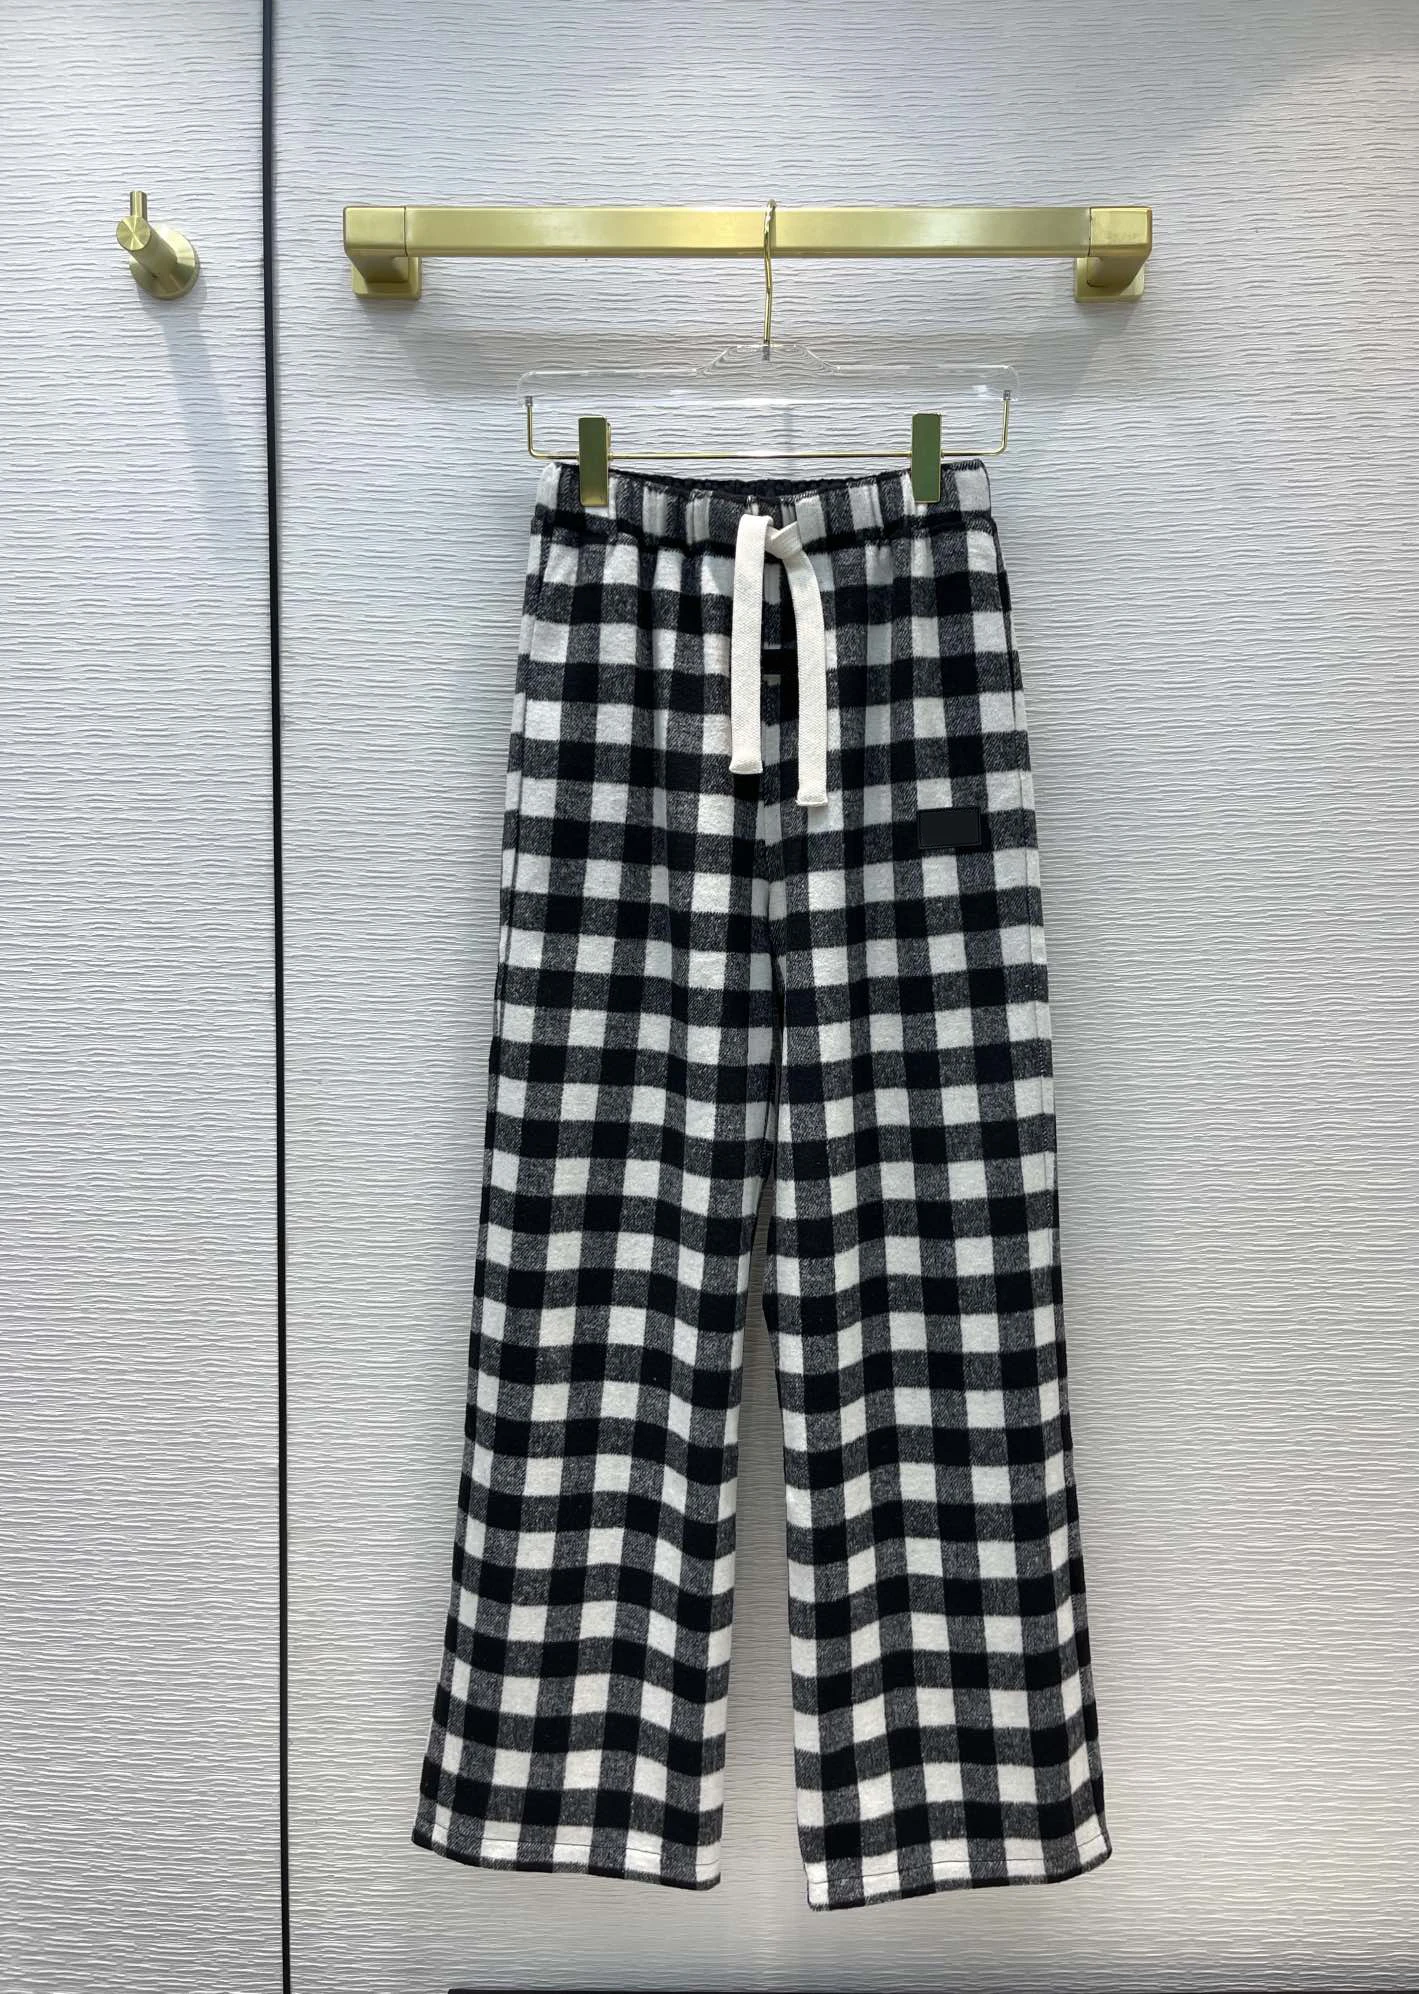 

2021 FW New Classic Black White Plaid Straight Casual Pants BUR Vintage Streetwear BERRY Chic High Quality Bottoms Wool Trousers